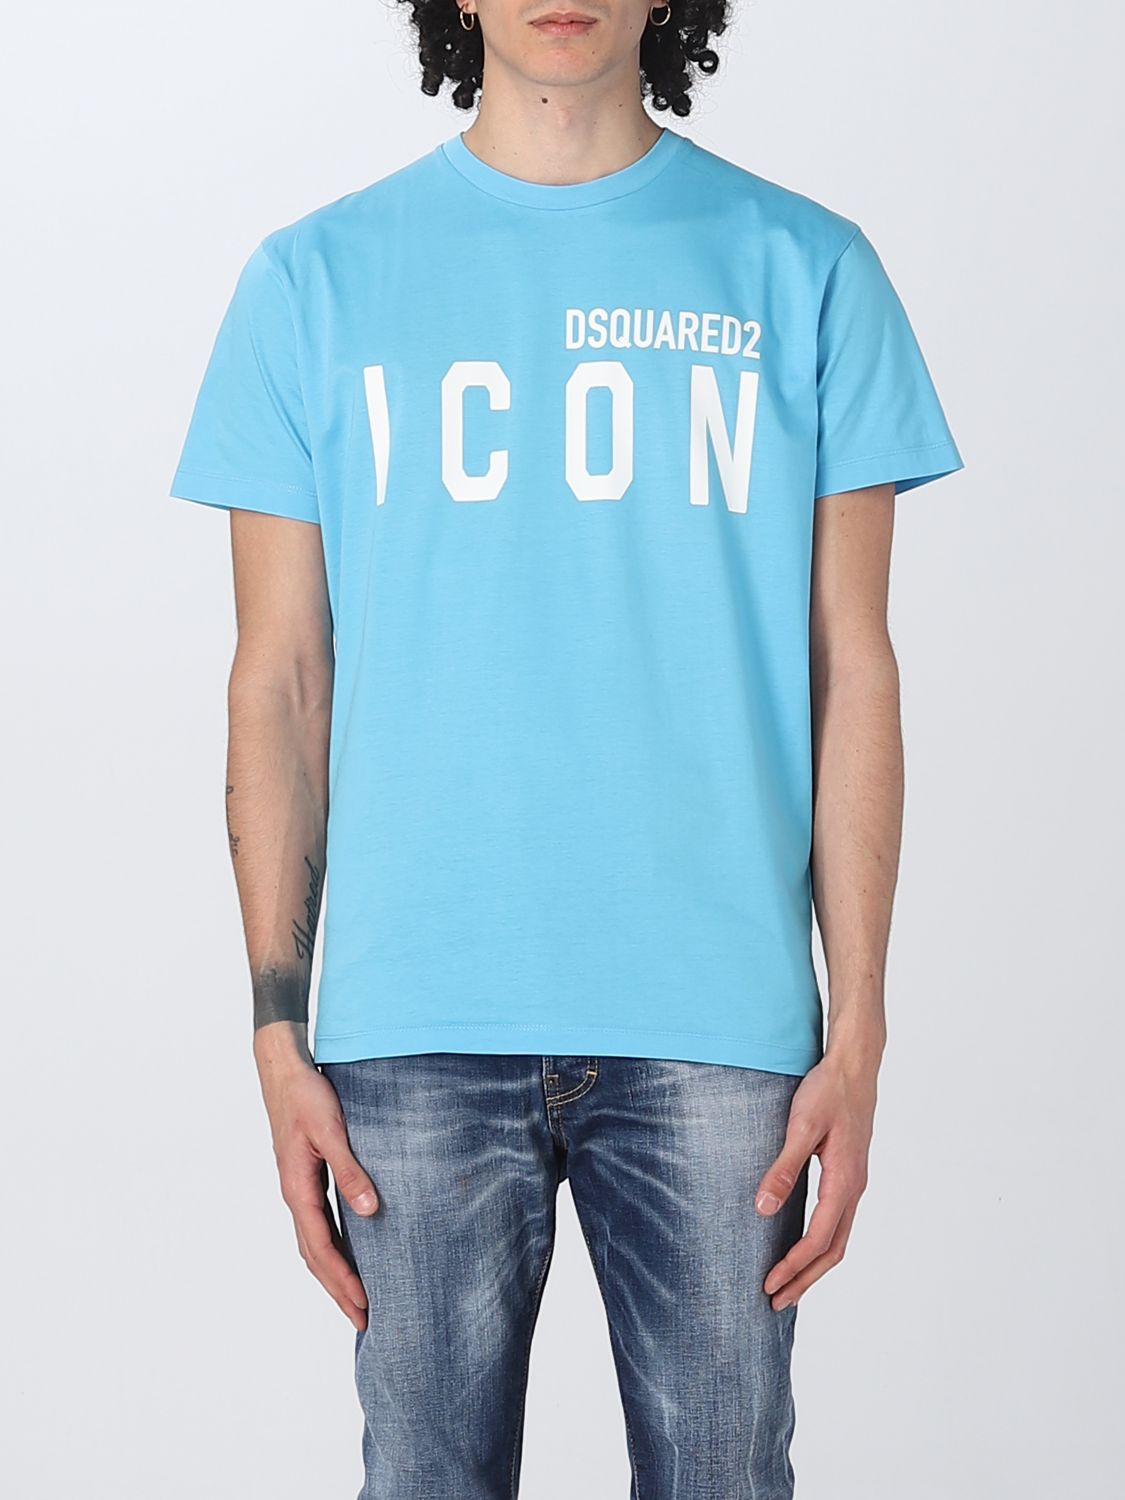 Voorschrijven tempo Anzai DSQUARED2: t-shirt for man - Gnawed Blue | Dsquared2 t-shirt  S79GC0003S23009 online on GIGLIO.COM